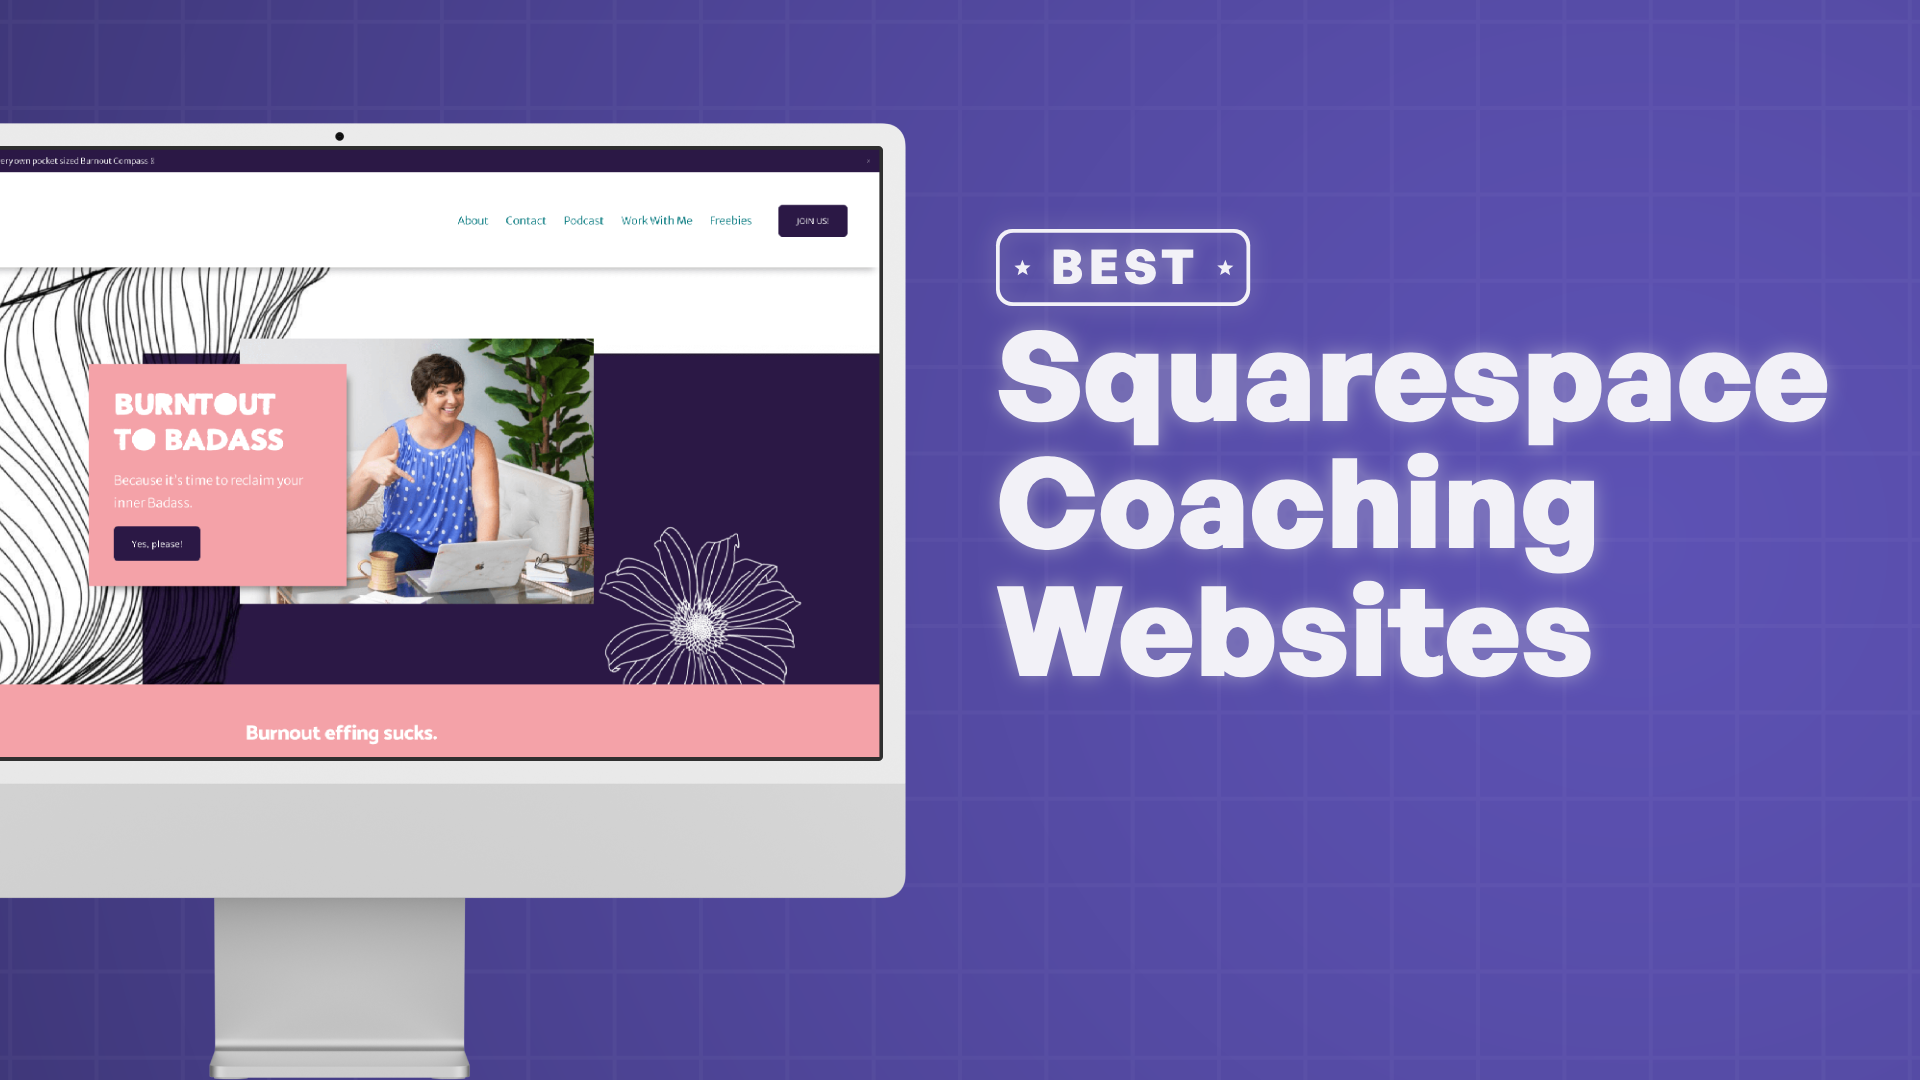 "Best Coaching Websites on Squarespace" with screenshots of the coaching websites on Squarespace